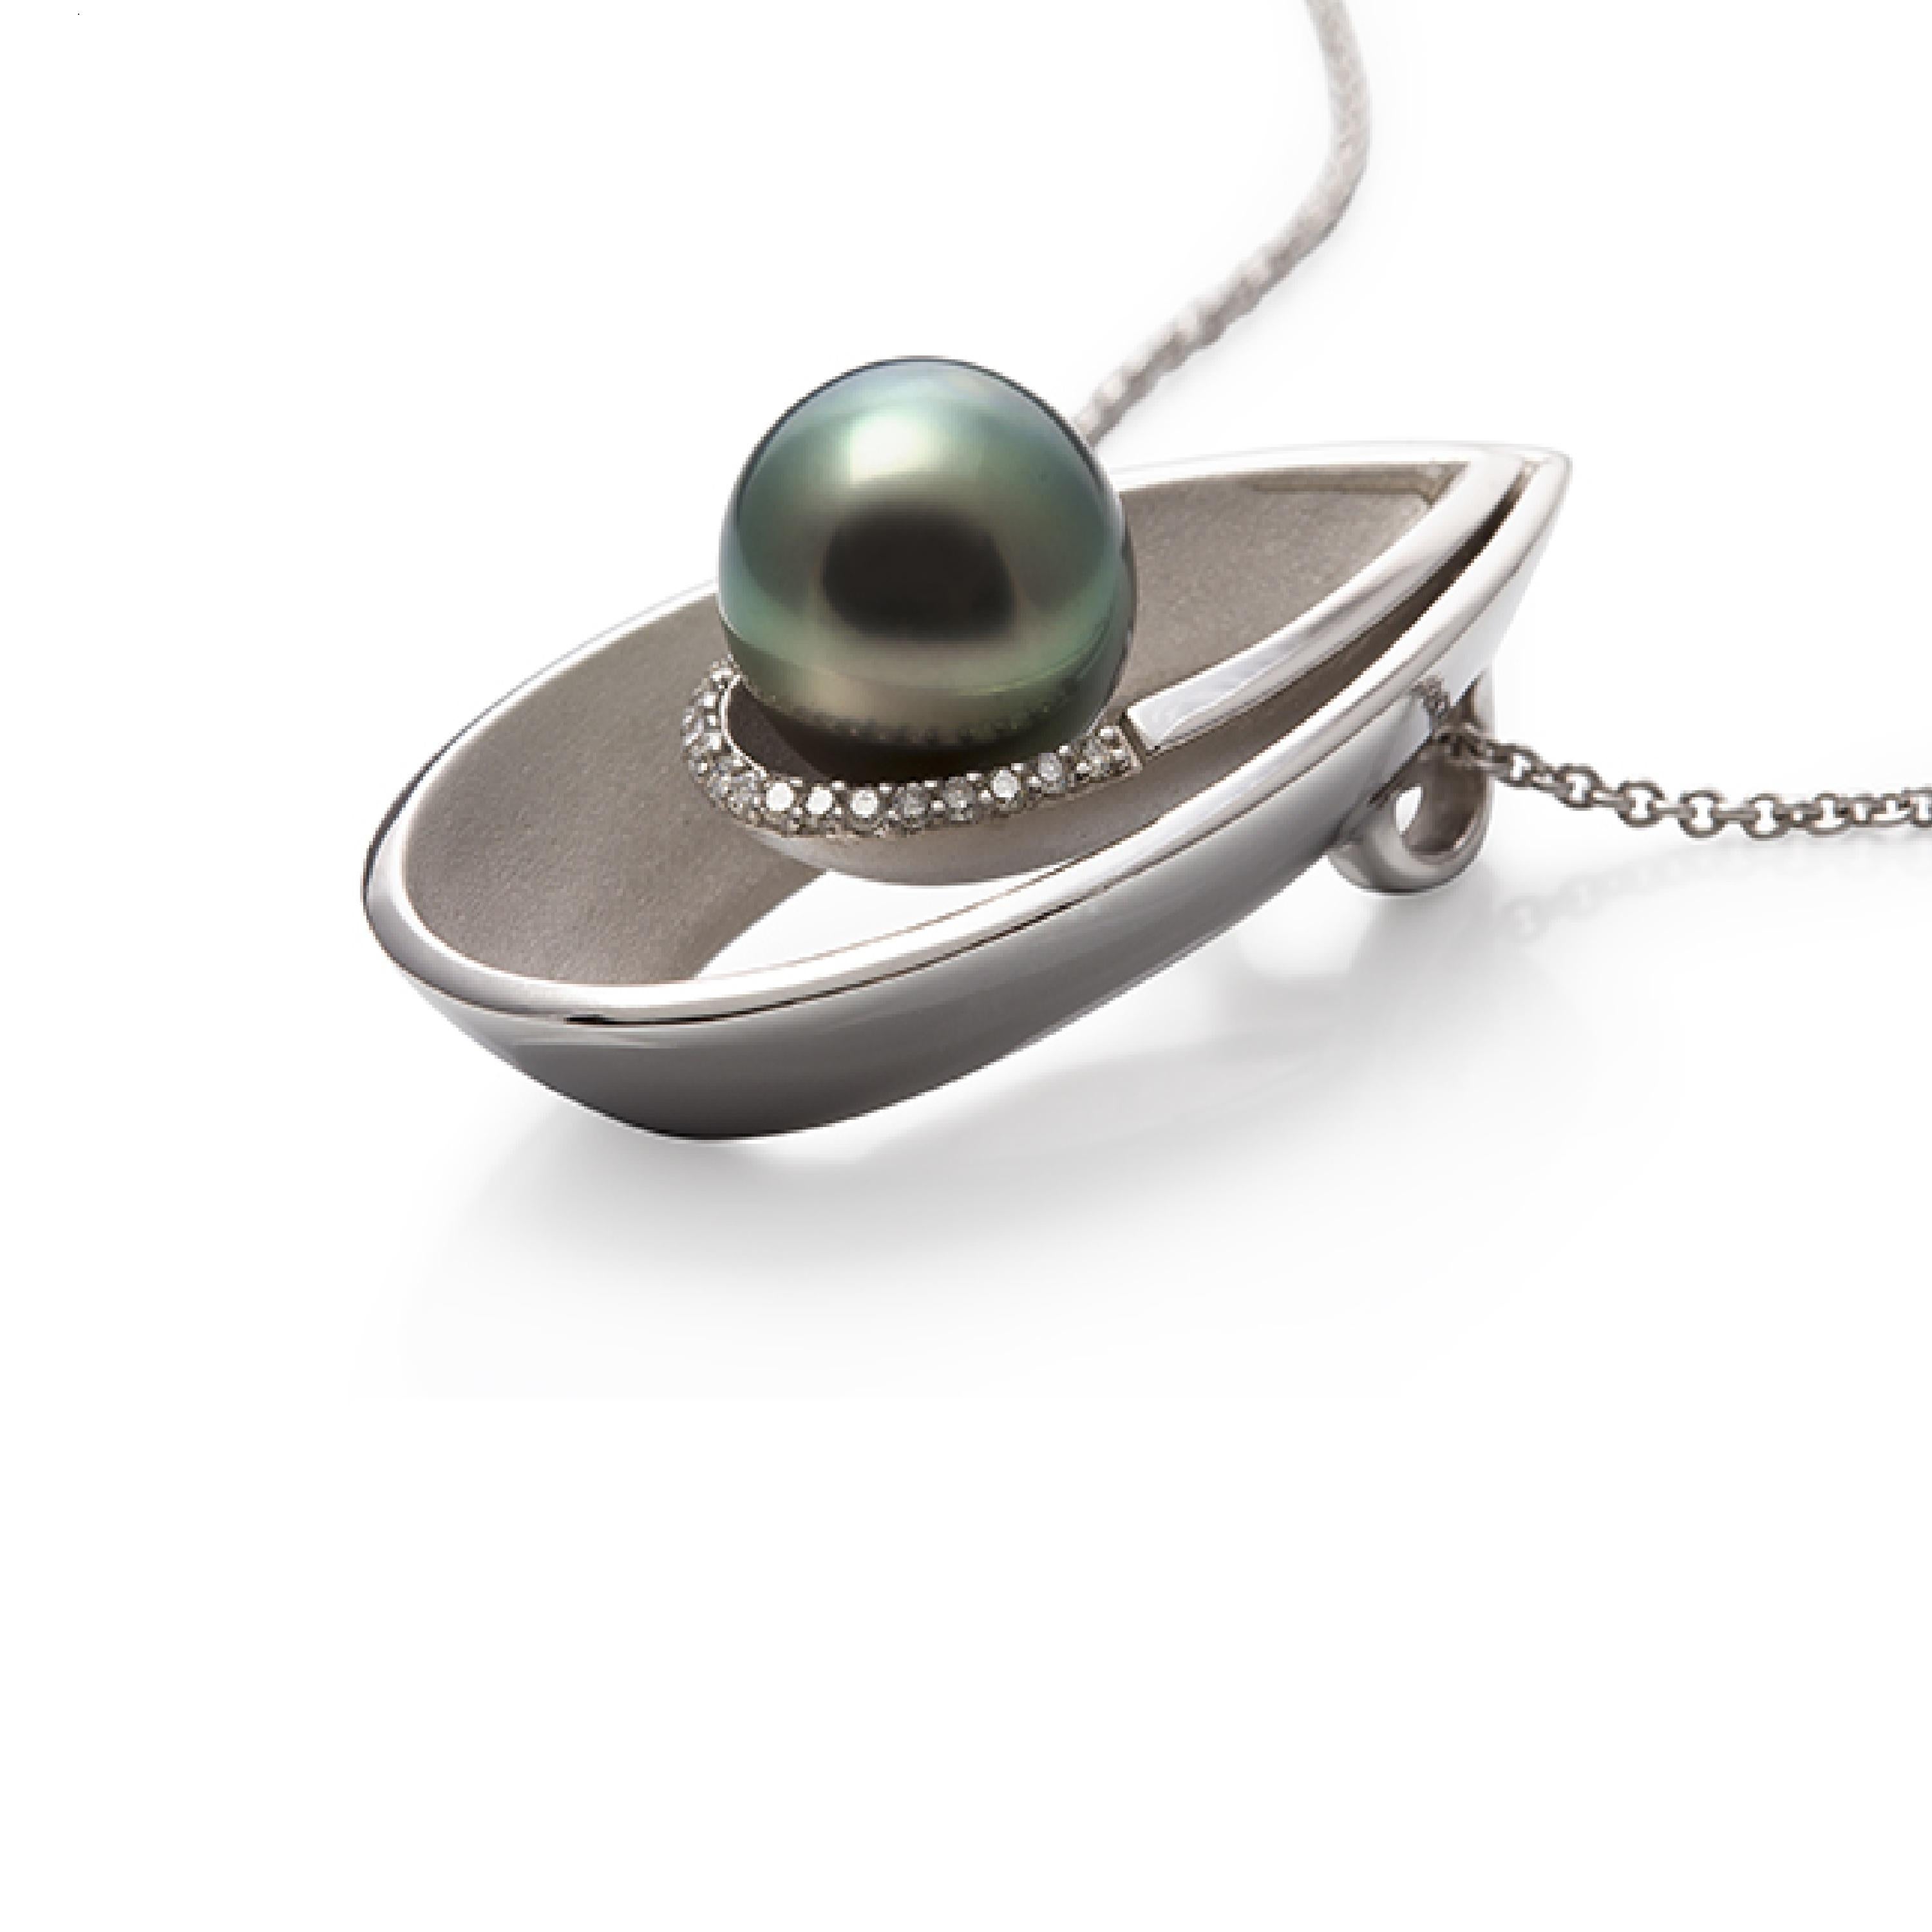 Bold 2 tier pendant of 9ct white gold with matt textured finish and
with a centre 9-10mm (0.39inch) light Tahitian peacock colour pearl of beautiful lustre....

Perfect combination of the green of the pearl and the white of the gold....

This bold